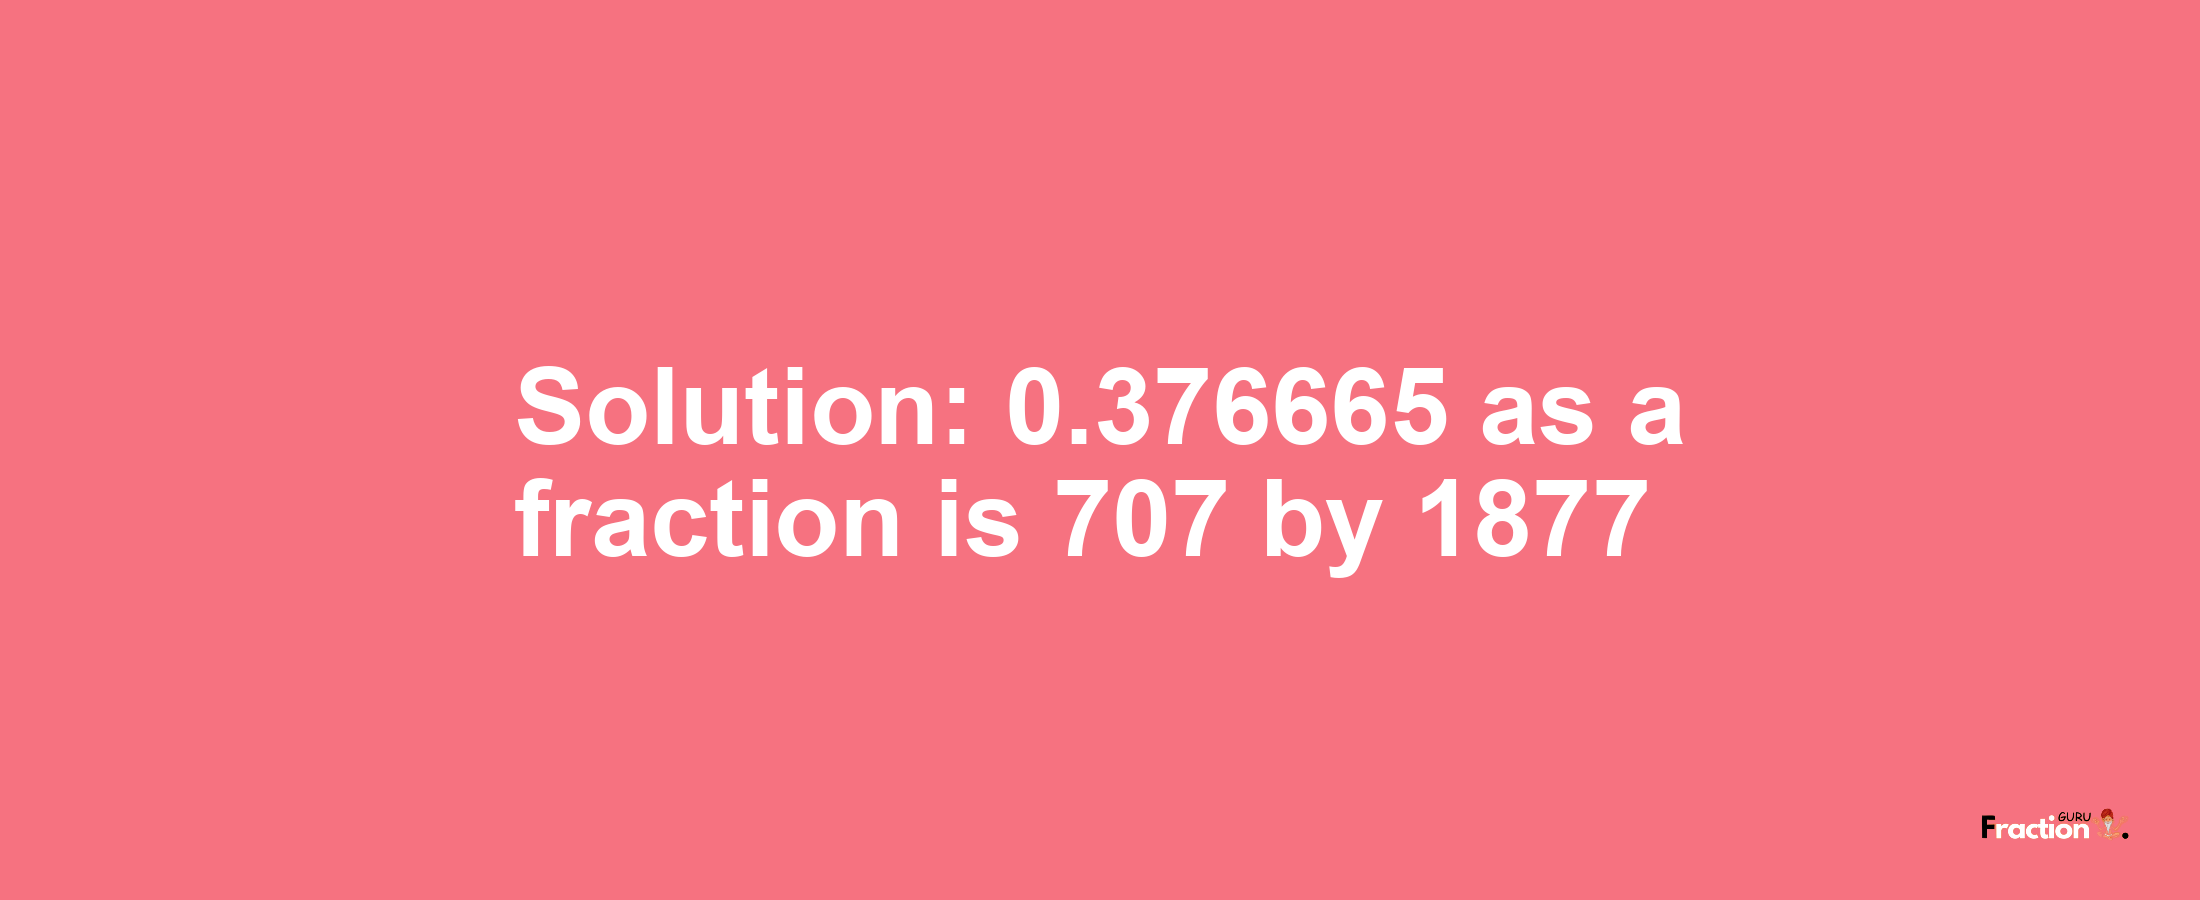 Solution:0.376665 as a fraction is 707/1877